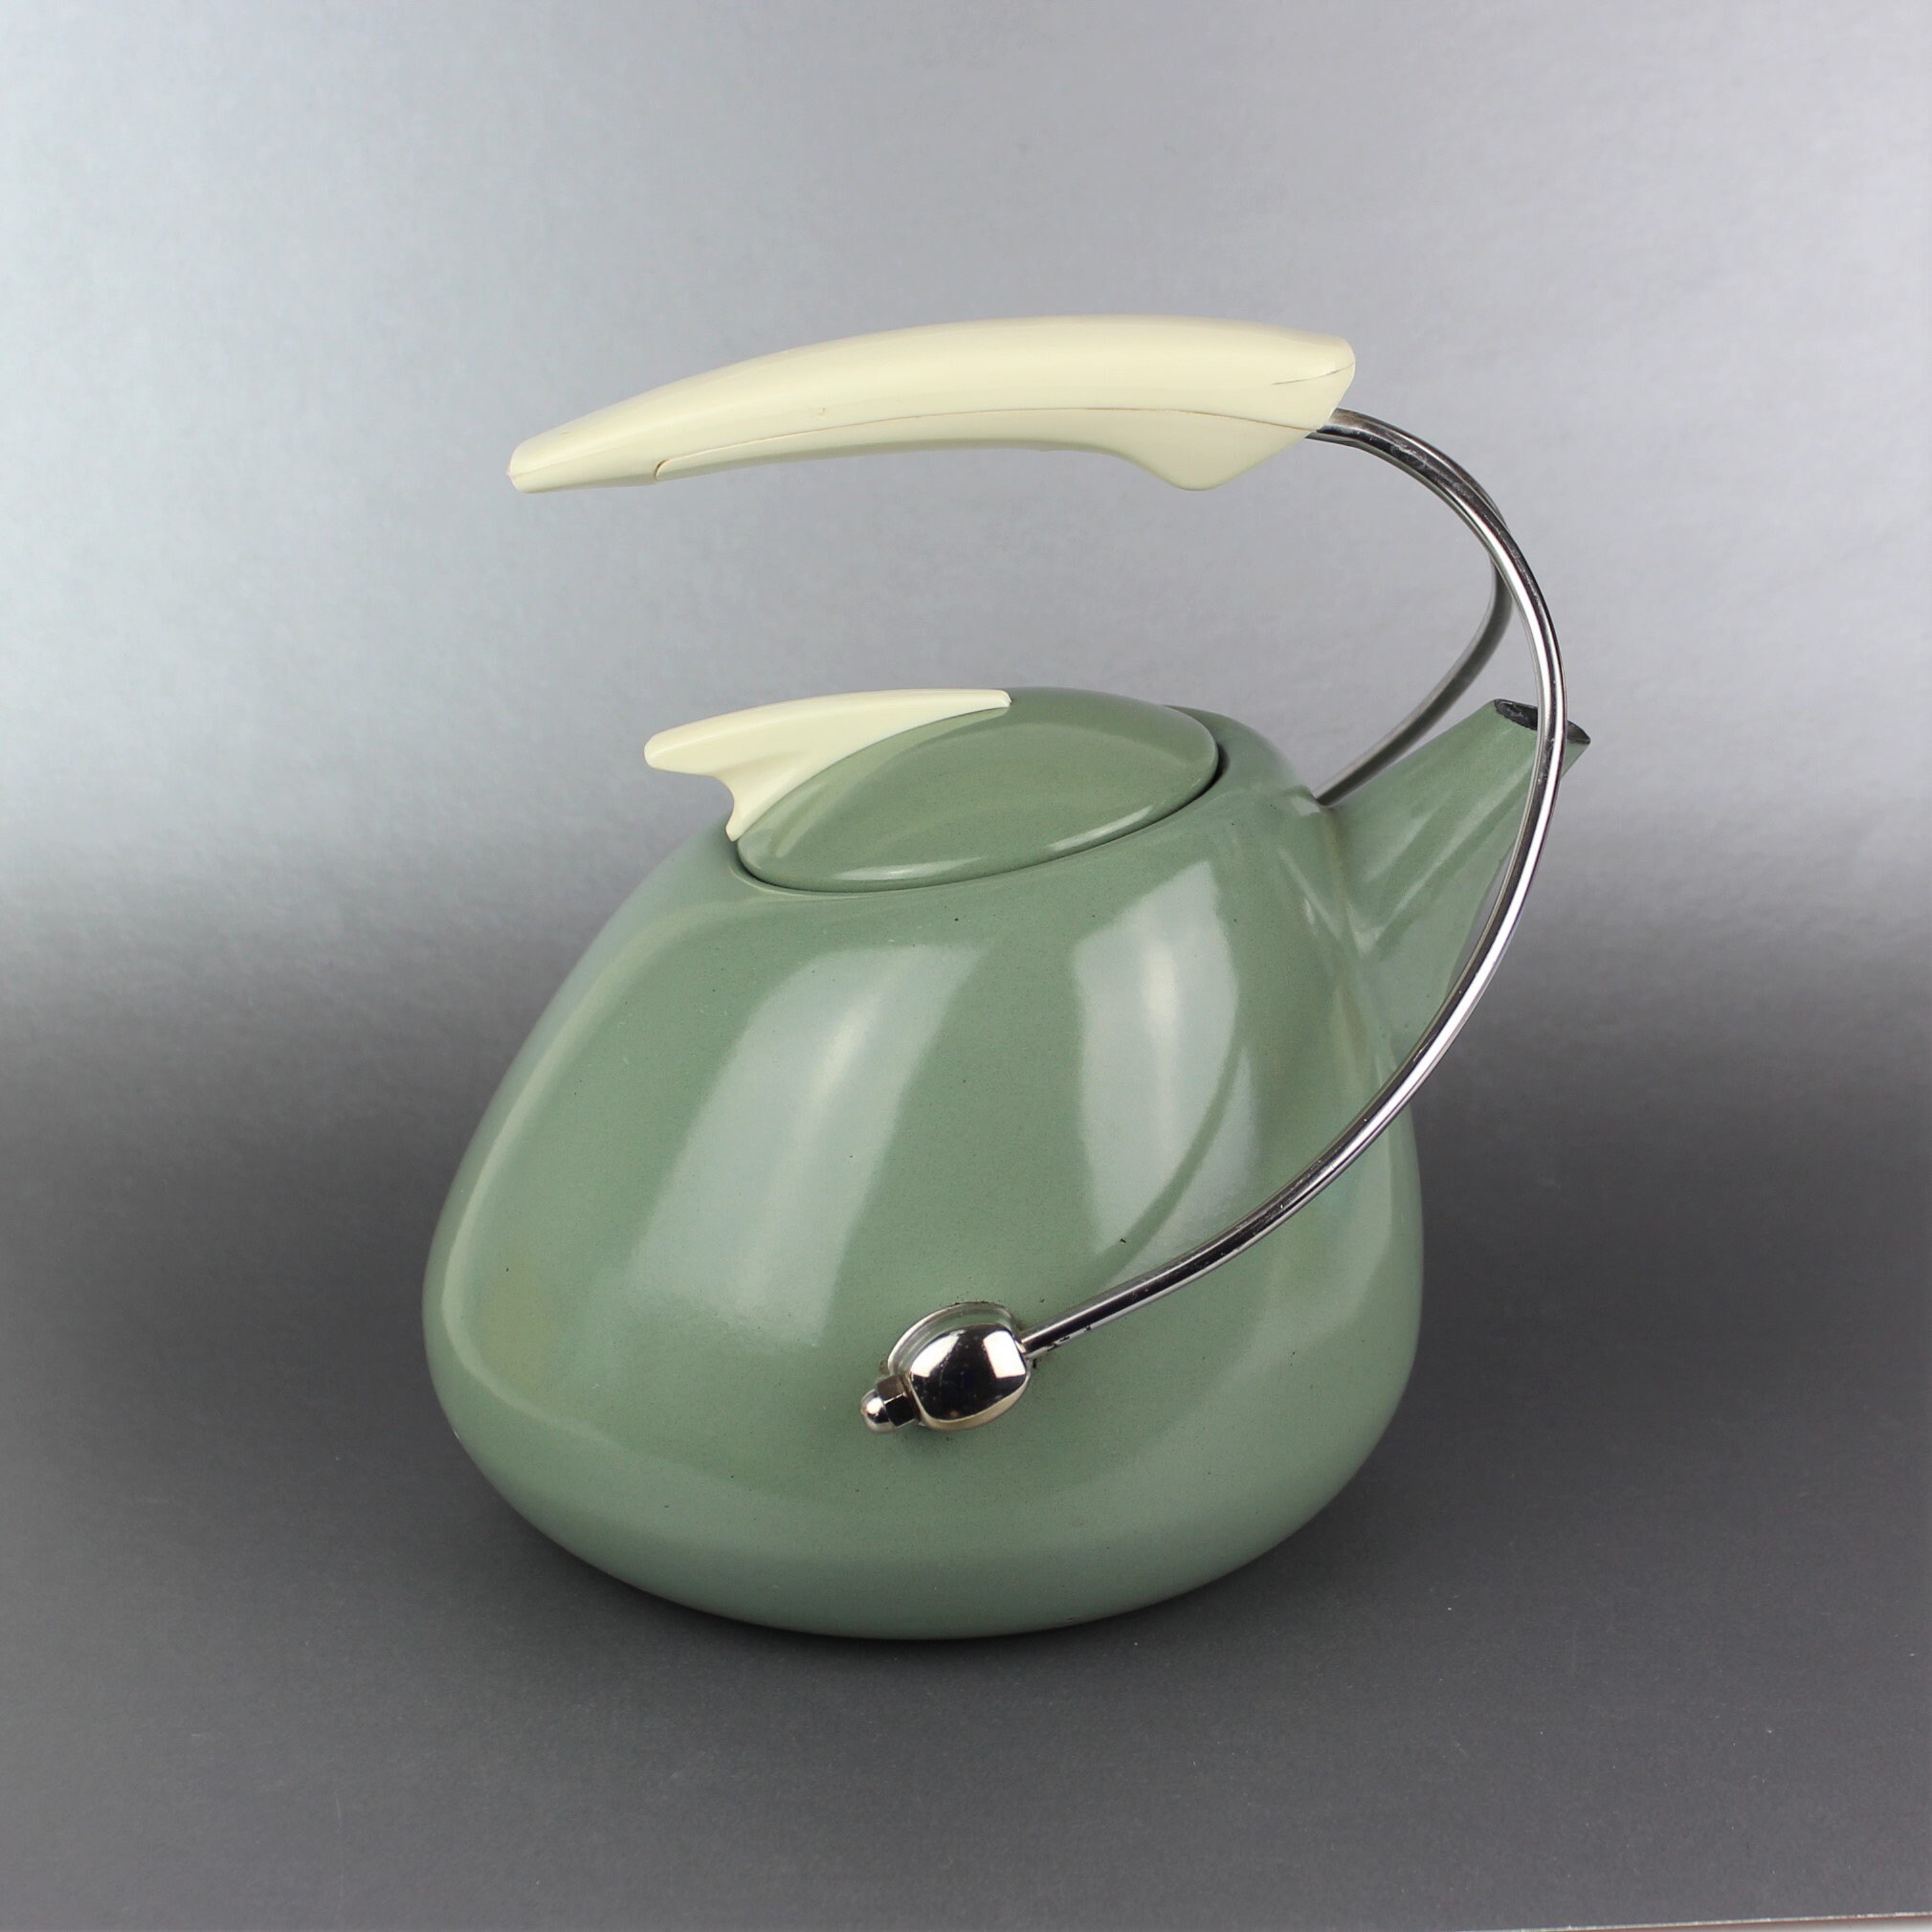 Nevvacold Vintage / Retro Insulated Teapot